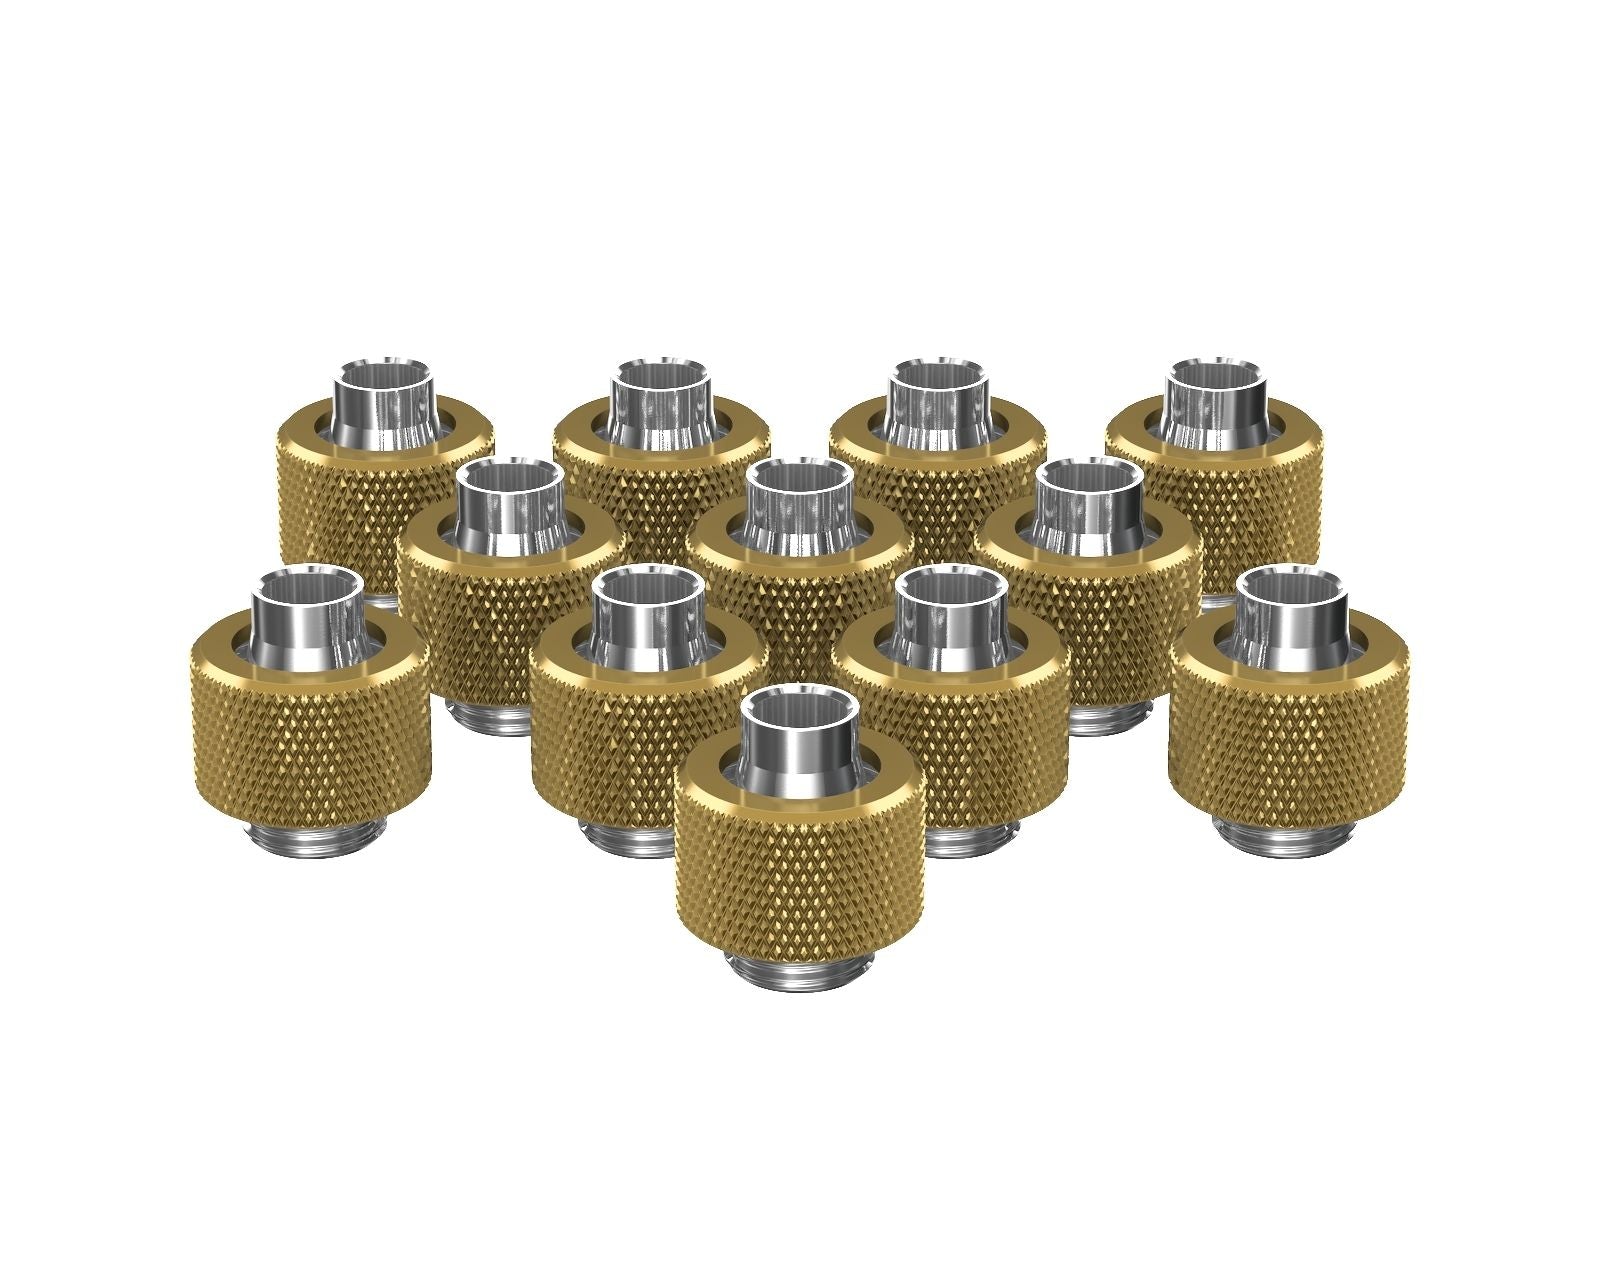 PrimoChill SecureFit SX - Premium Compression Fitting For 3/8in ID x 1/2in OD Flexible Tubing 12 Pack (F-SFSX12-12) - Available in 20+ Colors, Custom Watercooling Loop Ready - Candy Gold